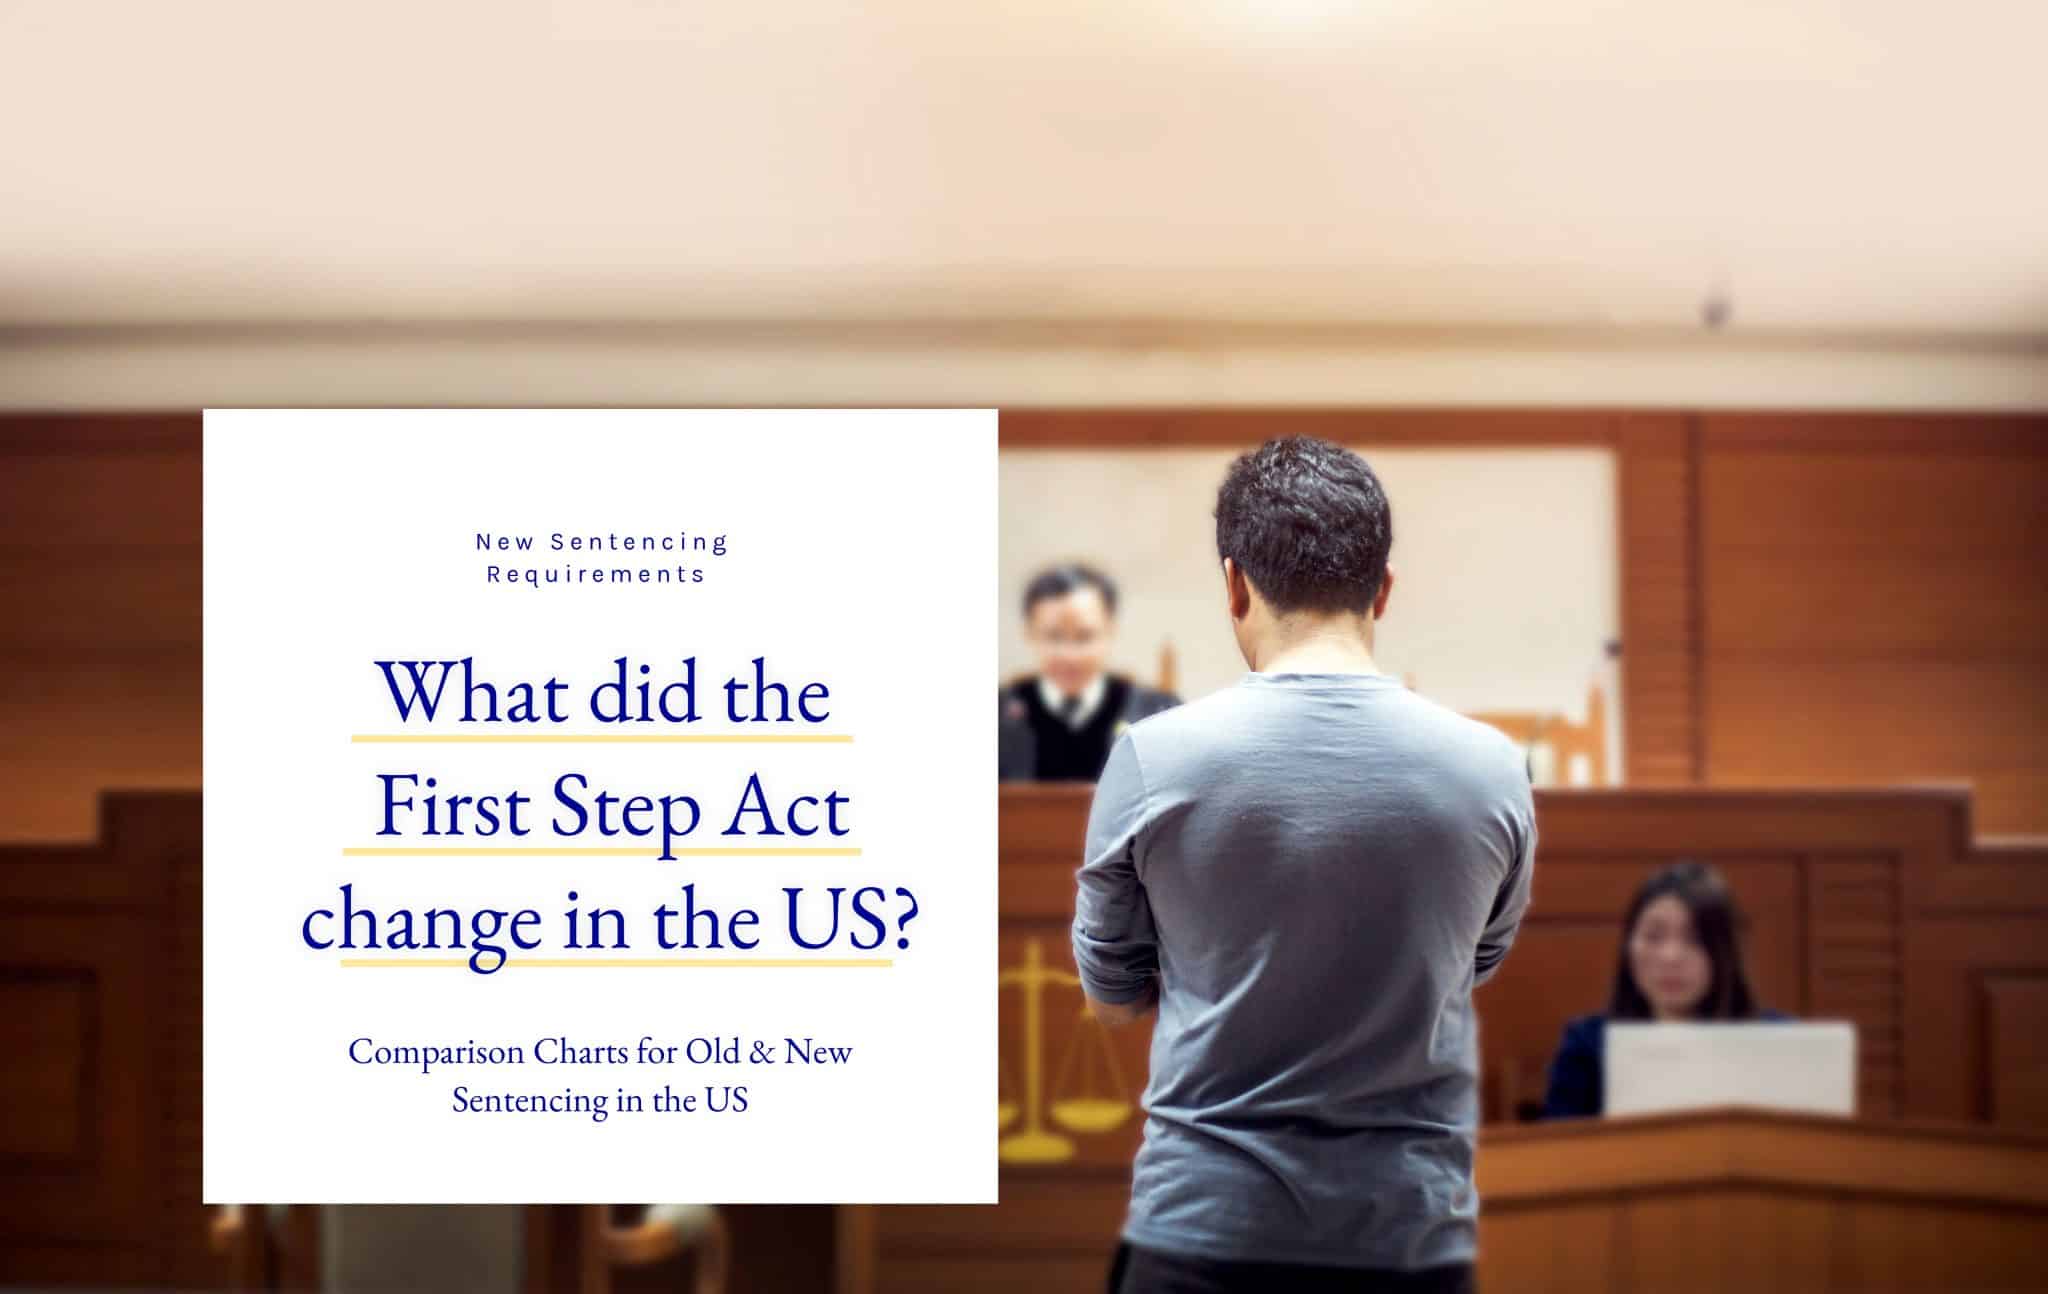 New Sentencing Requirements after First Step Act Comparison Charts